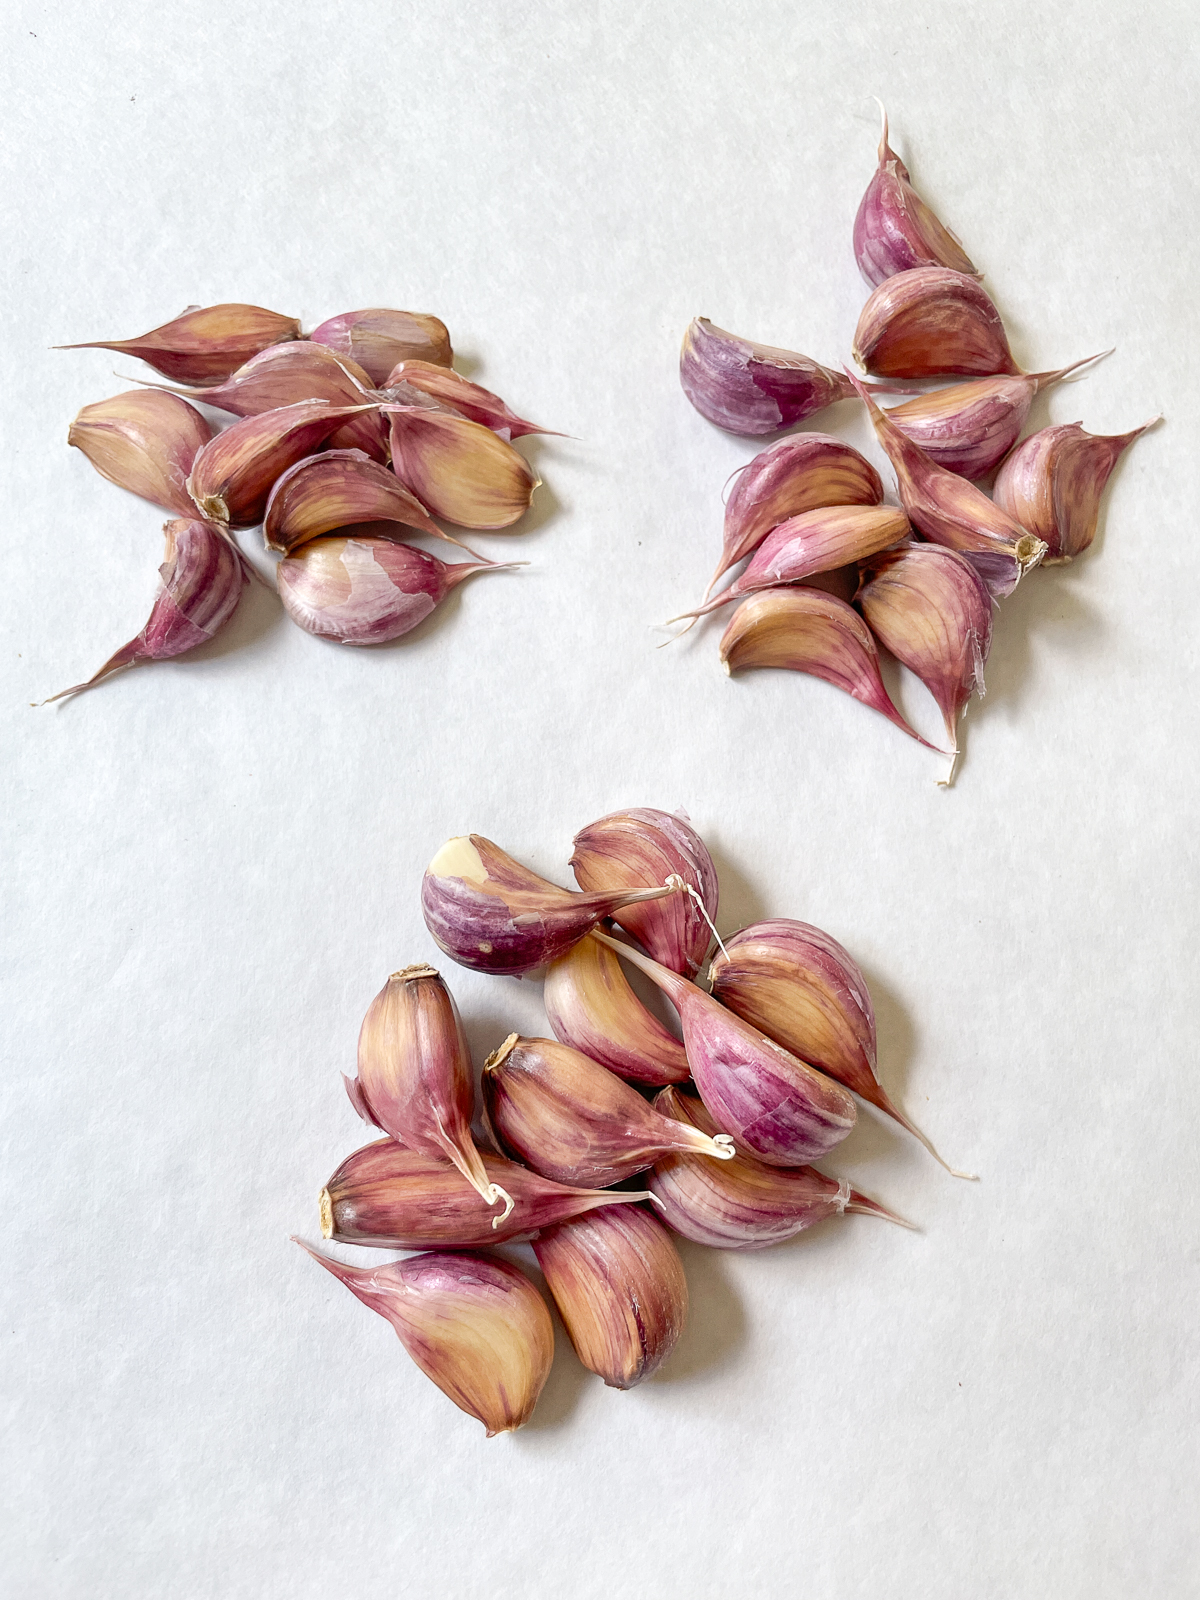 sorting garlic cloves by size before planting